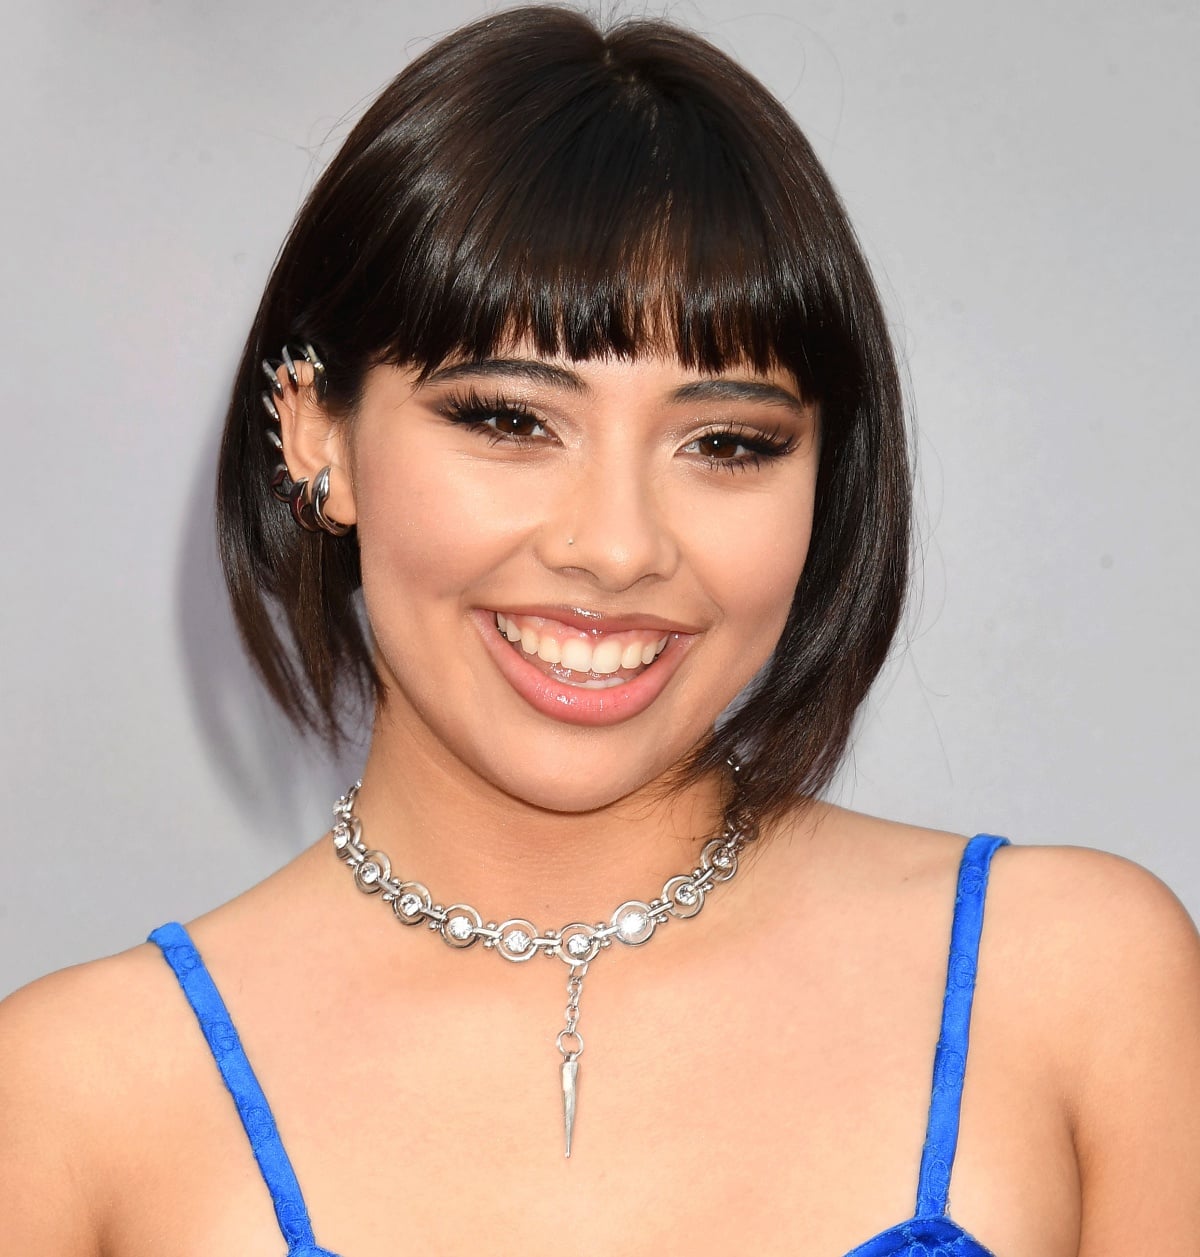 Xochitl Gomez debuting a chic bob with blunt bangs and an asymmetric style for a dose of cool edge